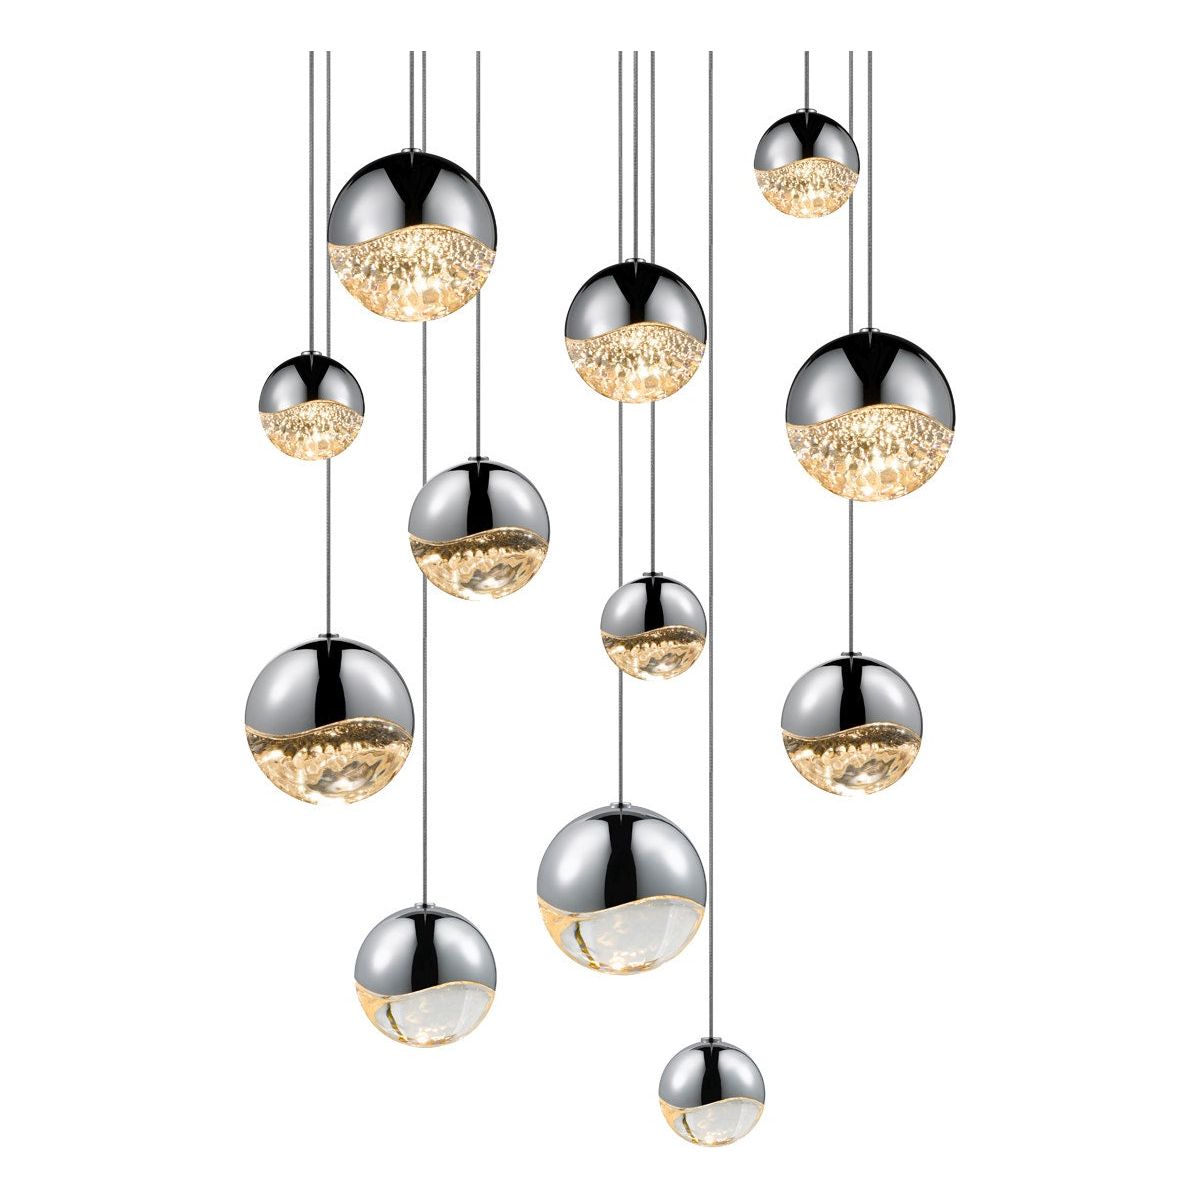 Grapes 12-Light Round Assorted LED Pendant